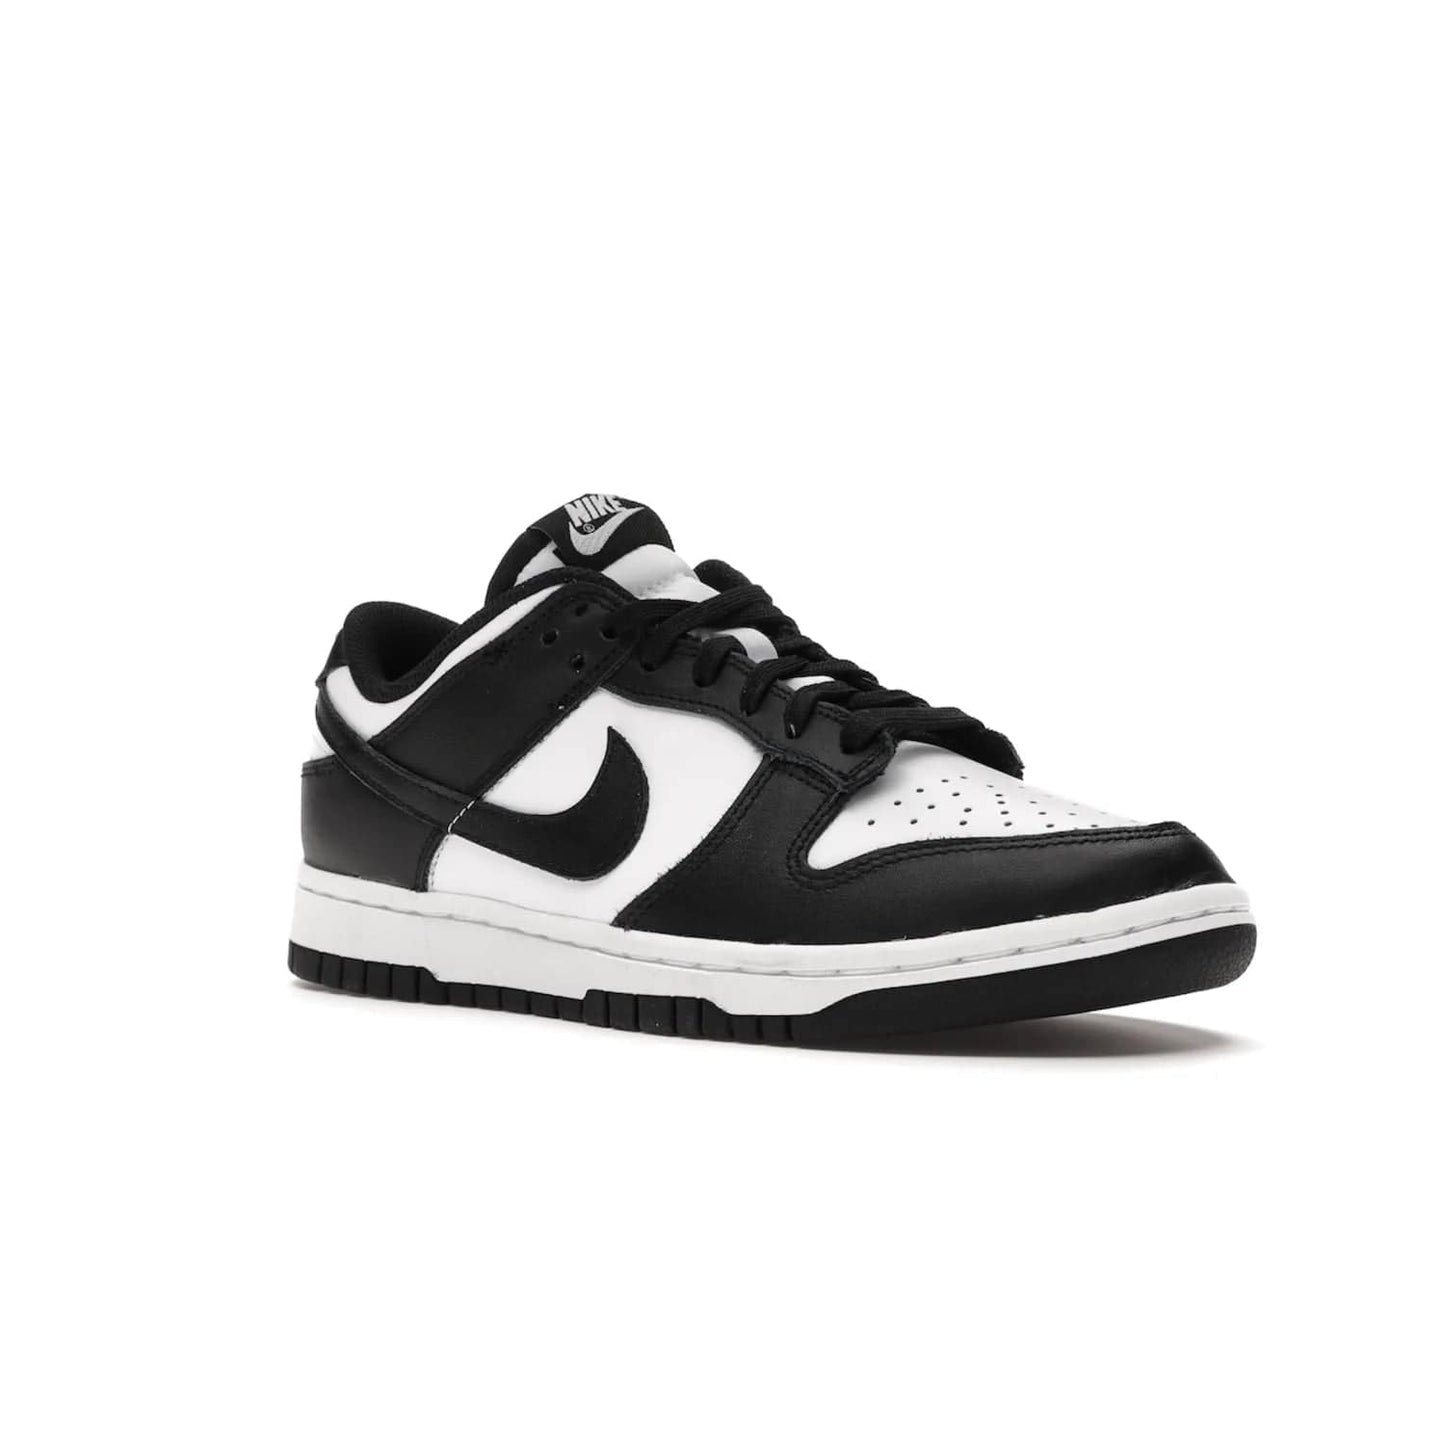 Nike Dunk Low Retro White Black Panda (2021) (Women's) - Image 5 - Only at www.BallersClubKickz.com - Say hello to the new Nike Dunk Low Retro White Black Panda (2021) (Women's)! White & black leather upper with Nike Swoosh logo. Get your pair for $100 in March 2021! Shop now!